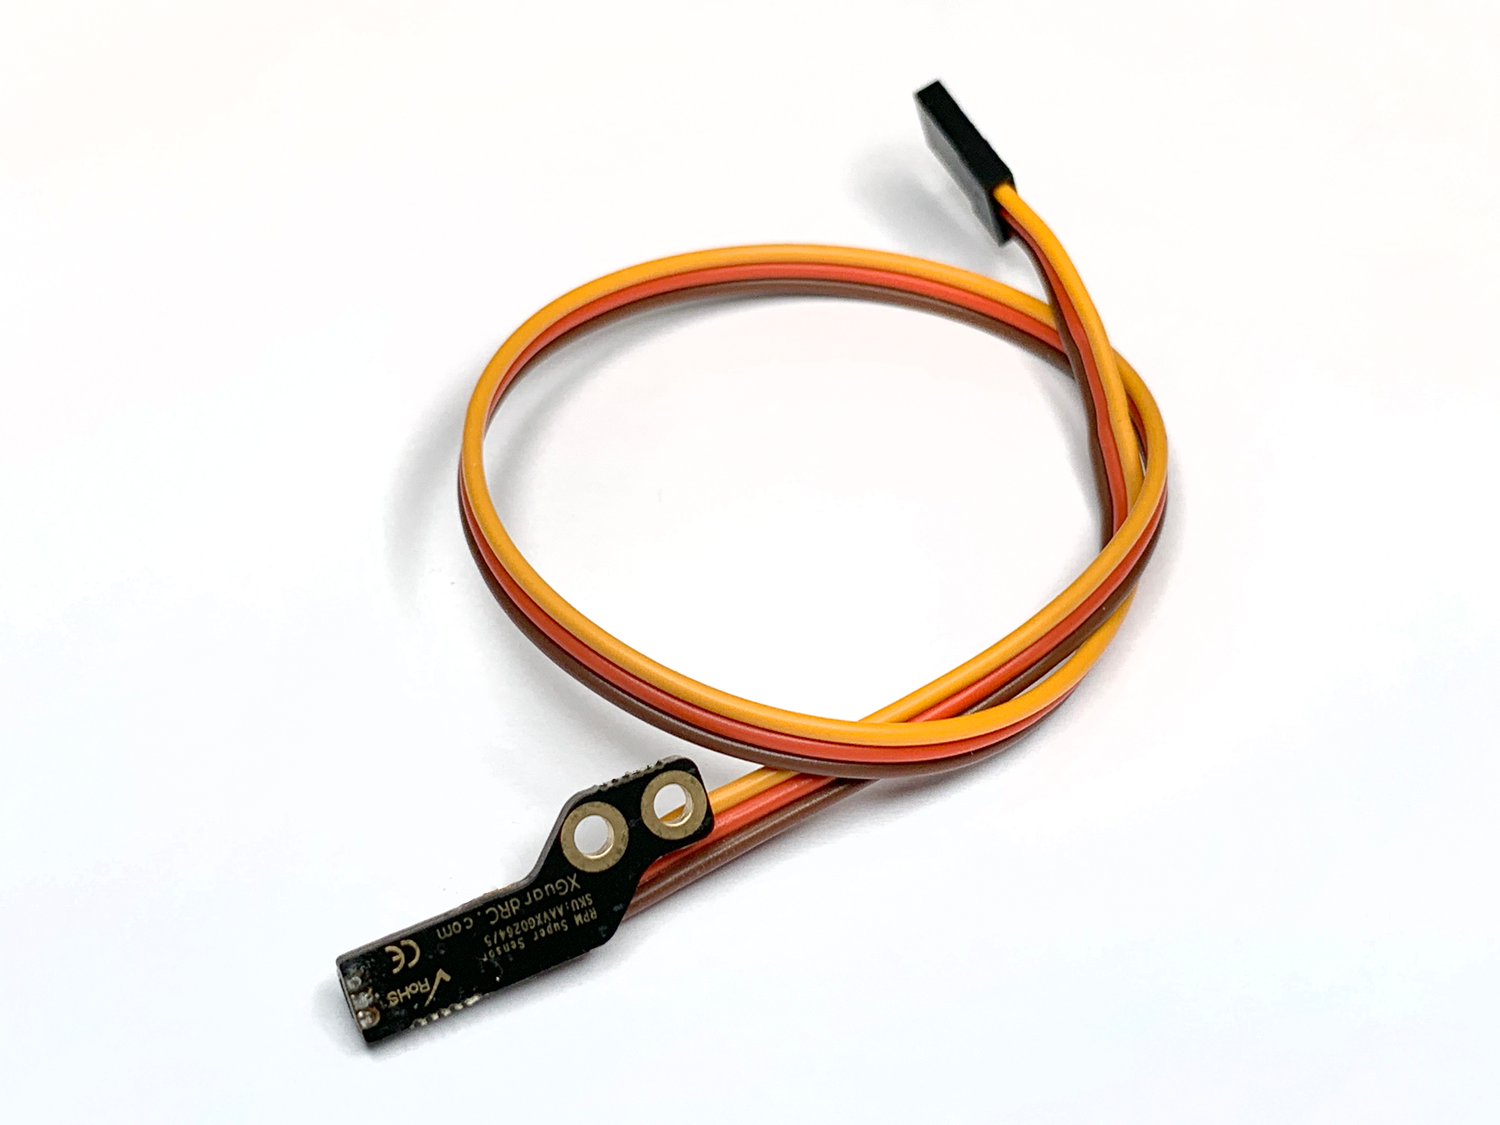 XGuard RPM SuperSensor with Static discharge protection and sensor power buffering